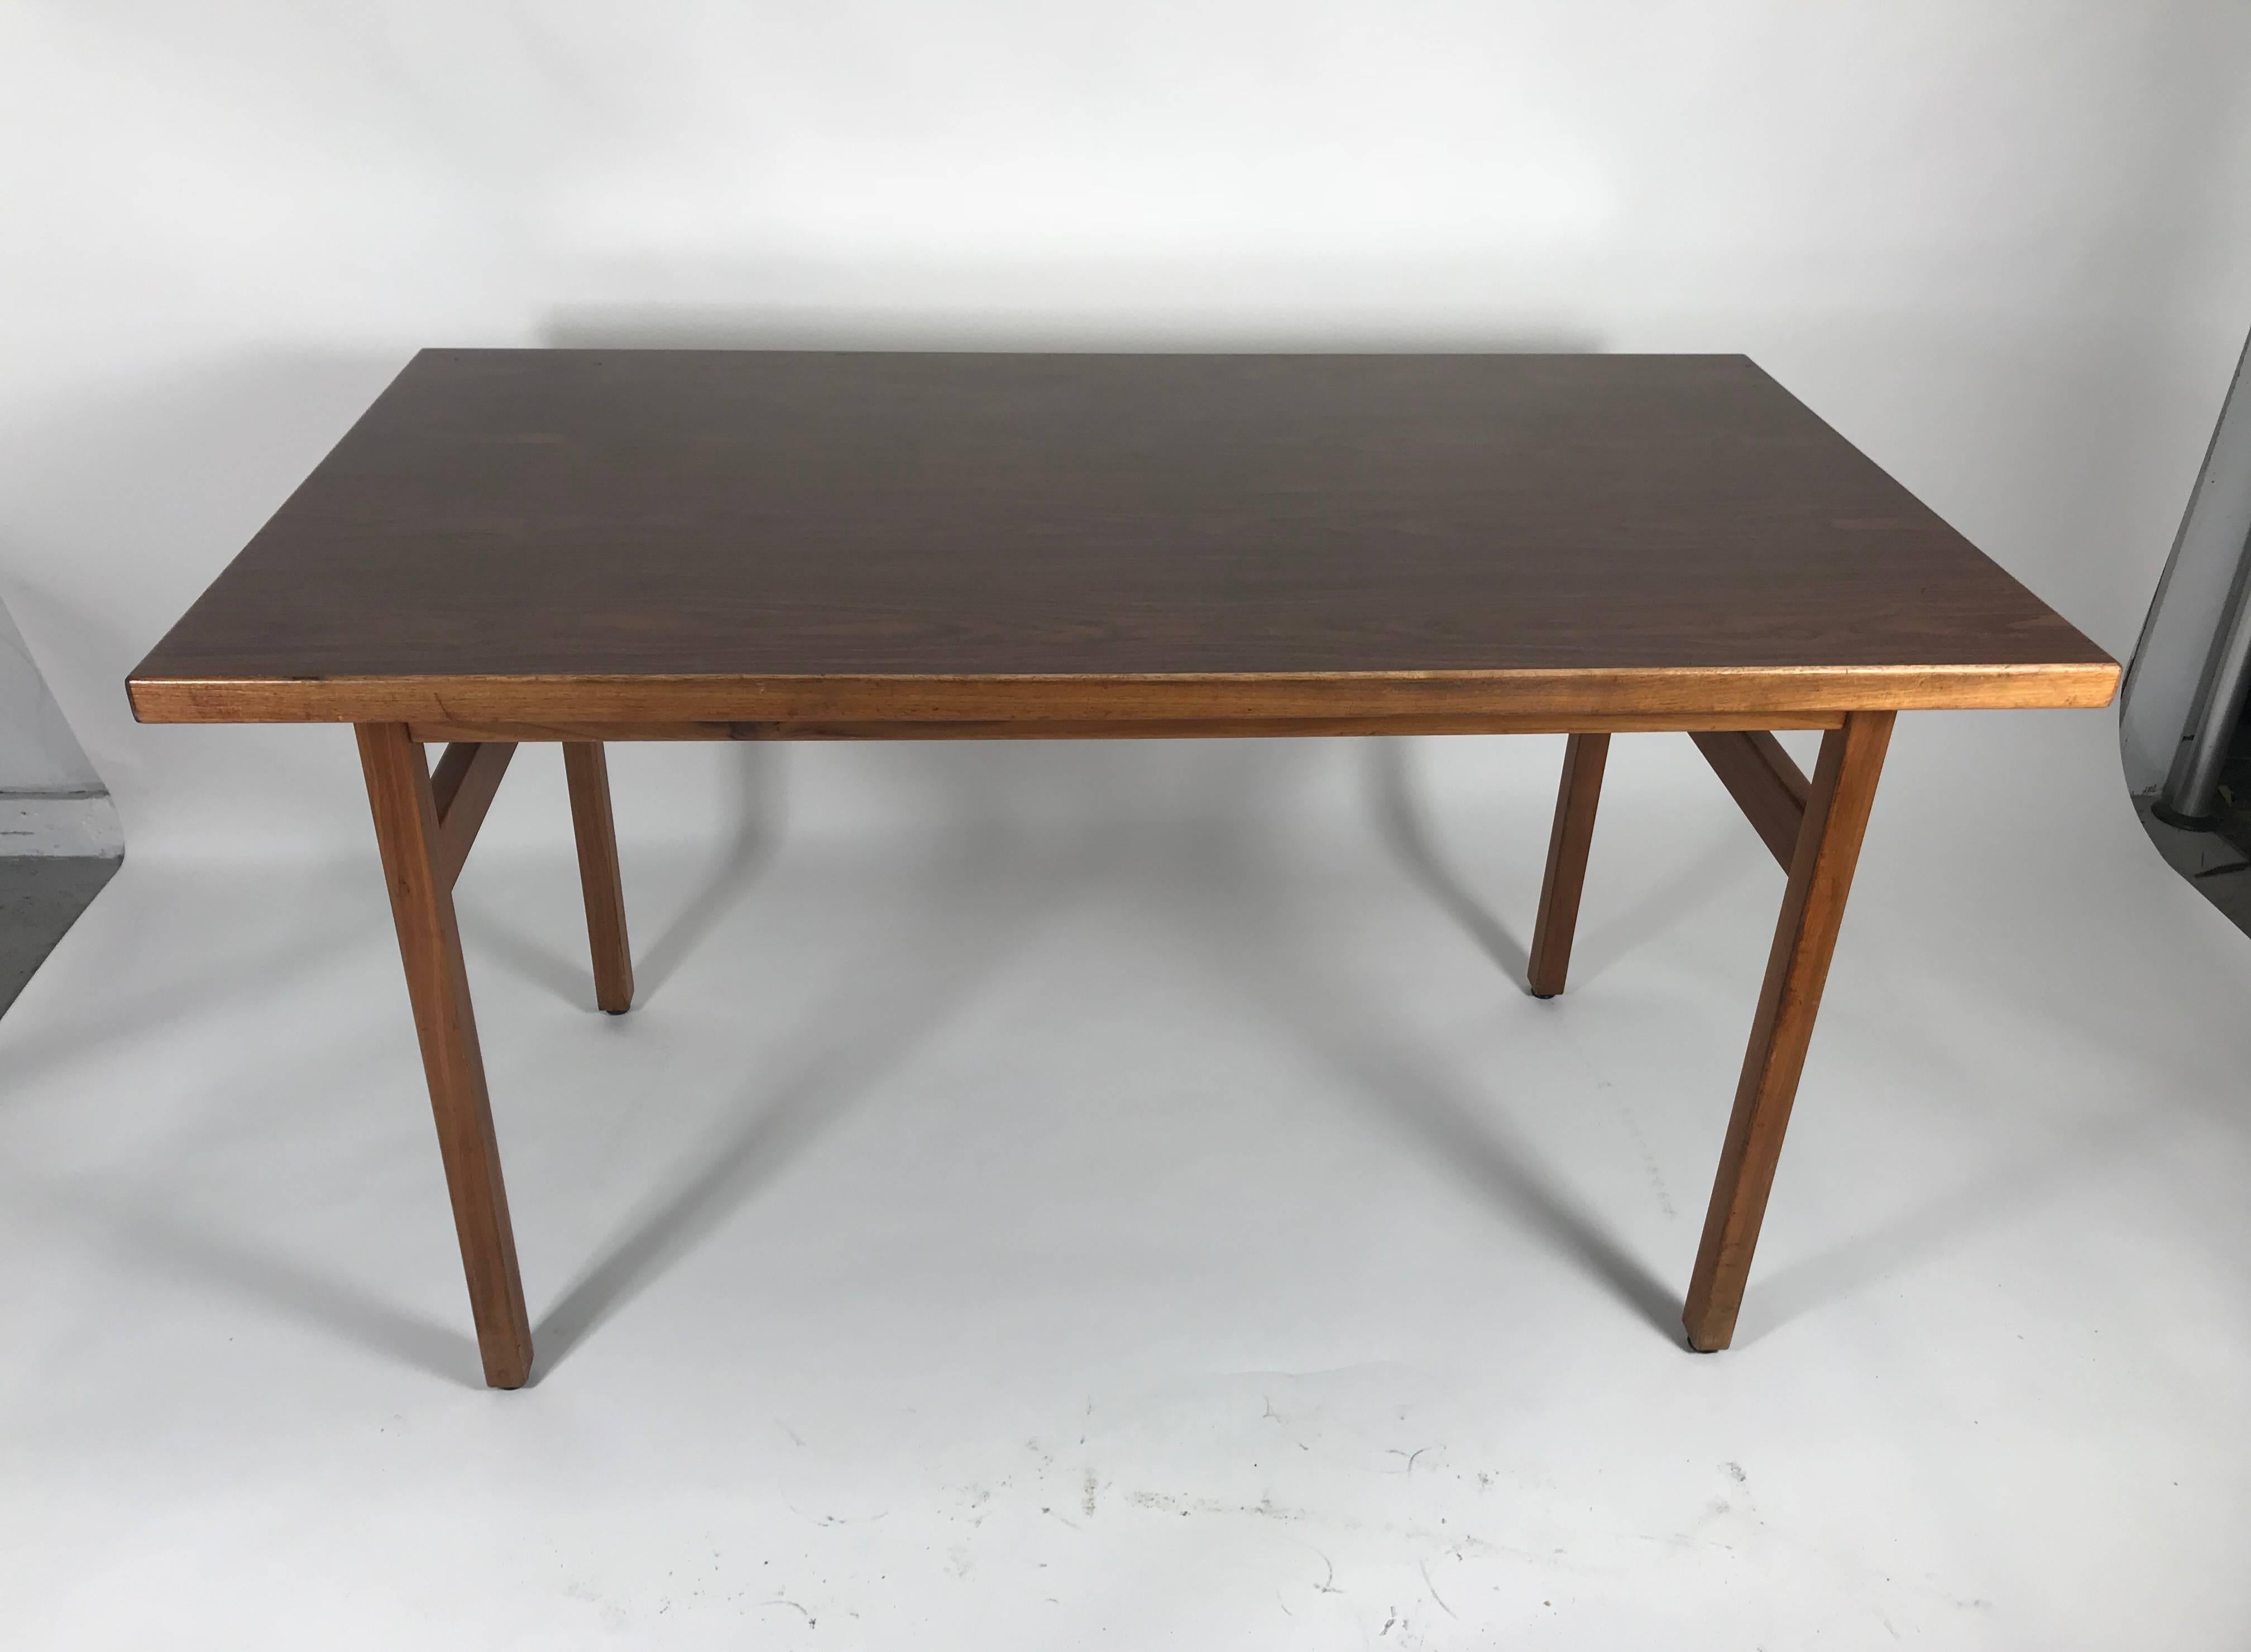 Classic Modernist table or desk designed by Jens Risom,, Stunning sleek ,simple ,elegant design. Hand delivery avail to New York City or anywhere en route from Buffalo New York.